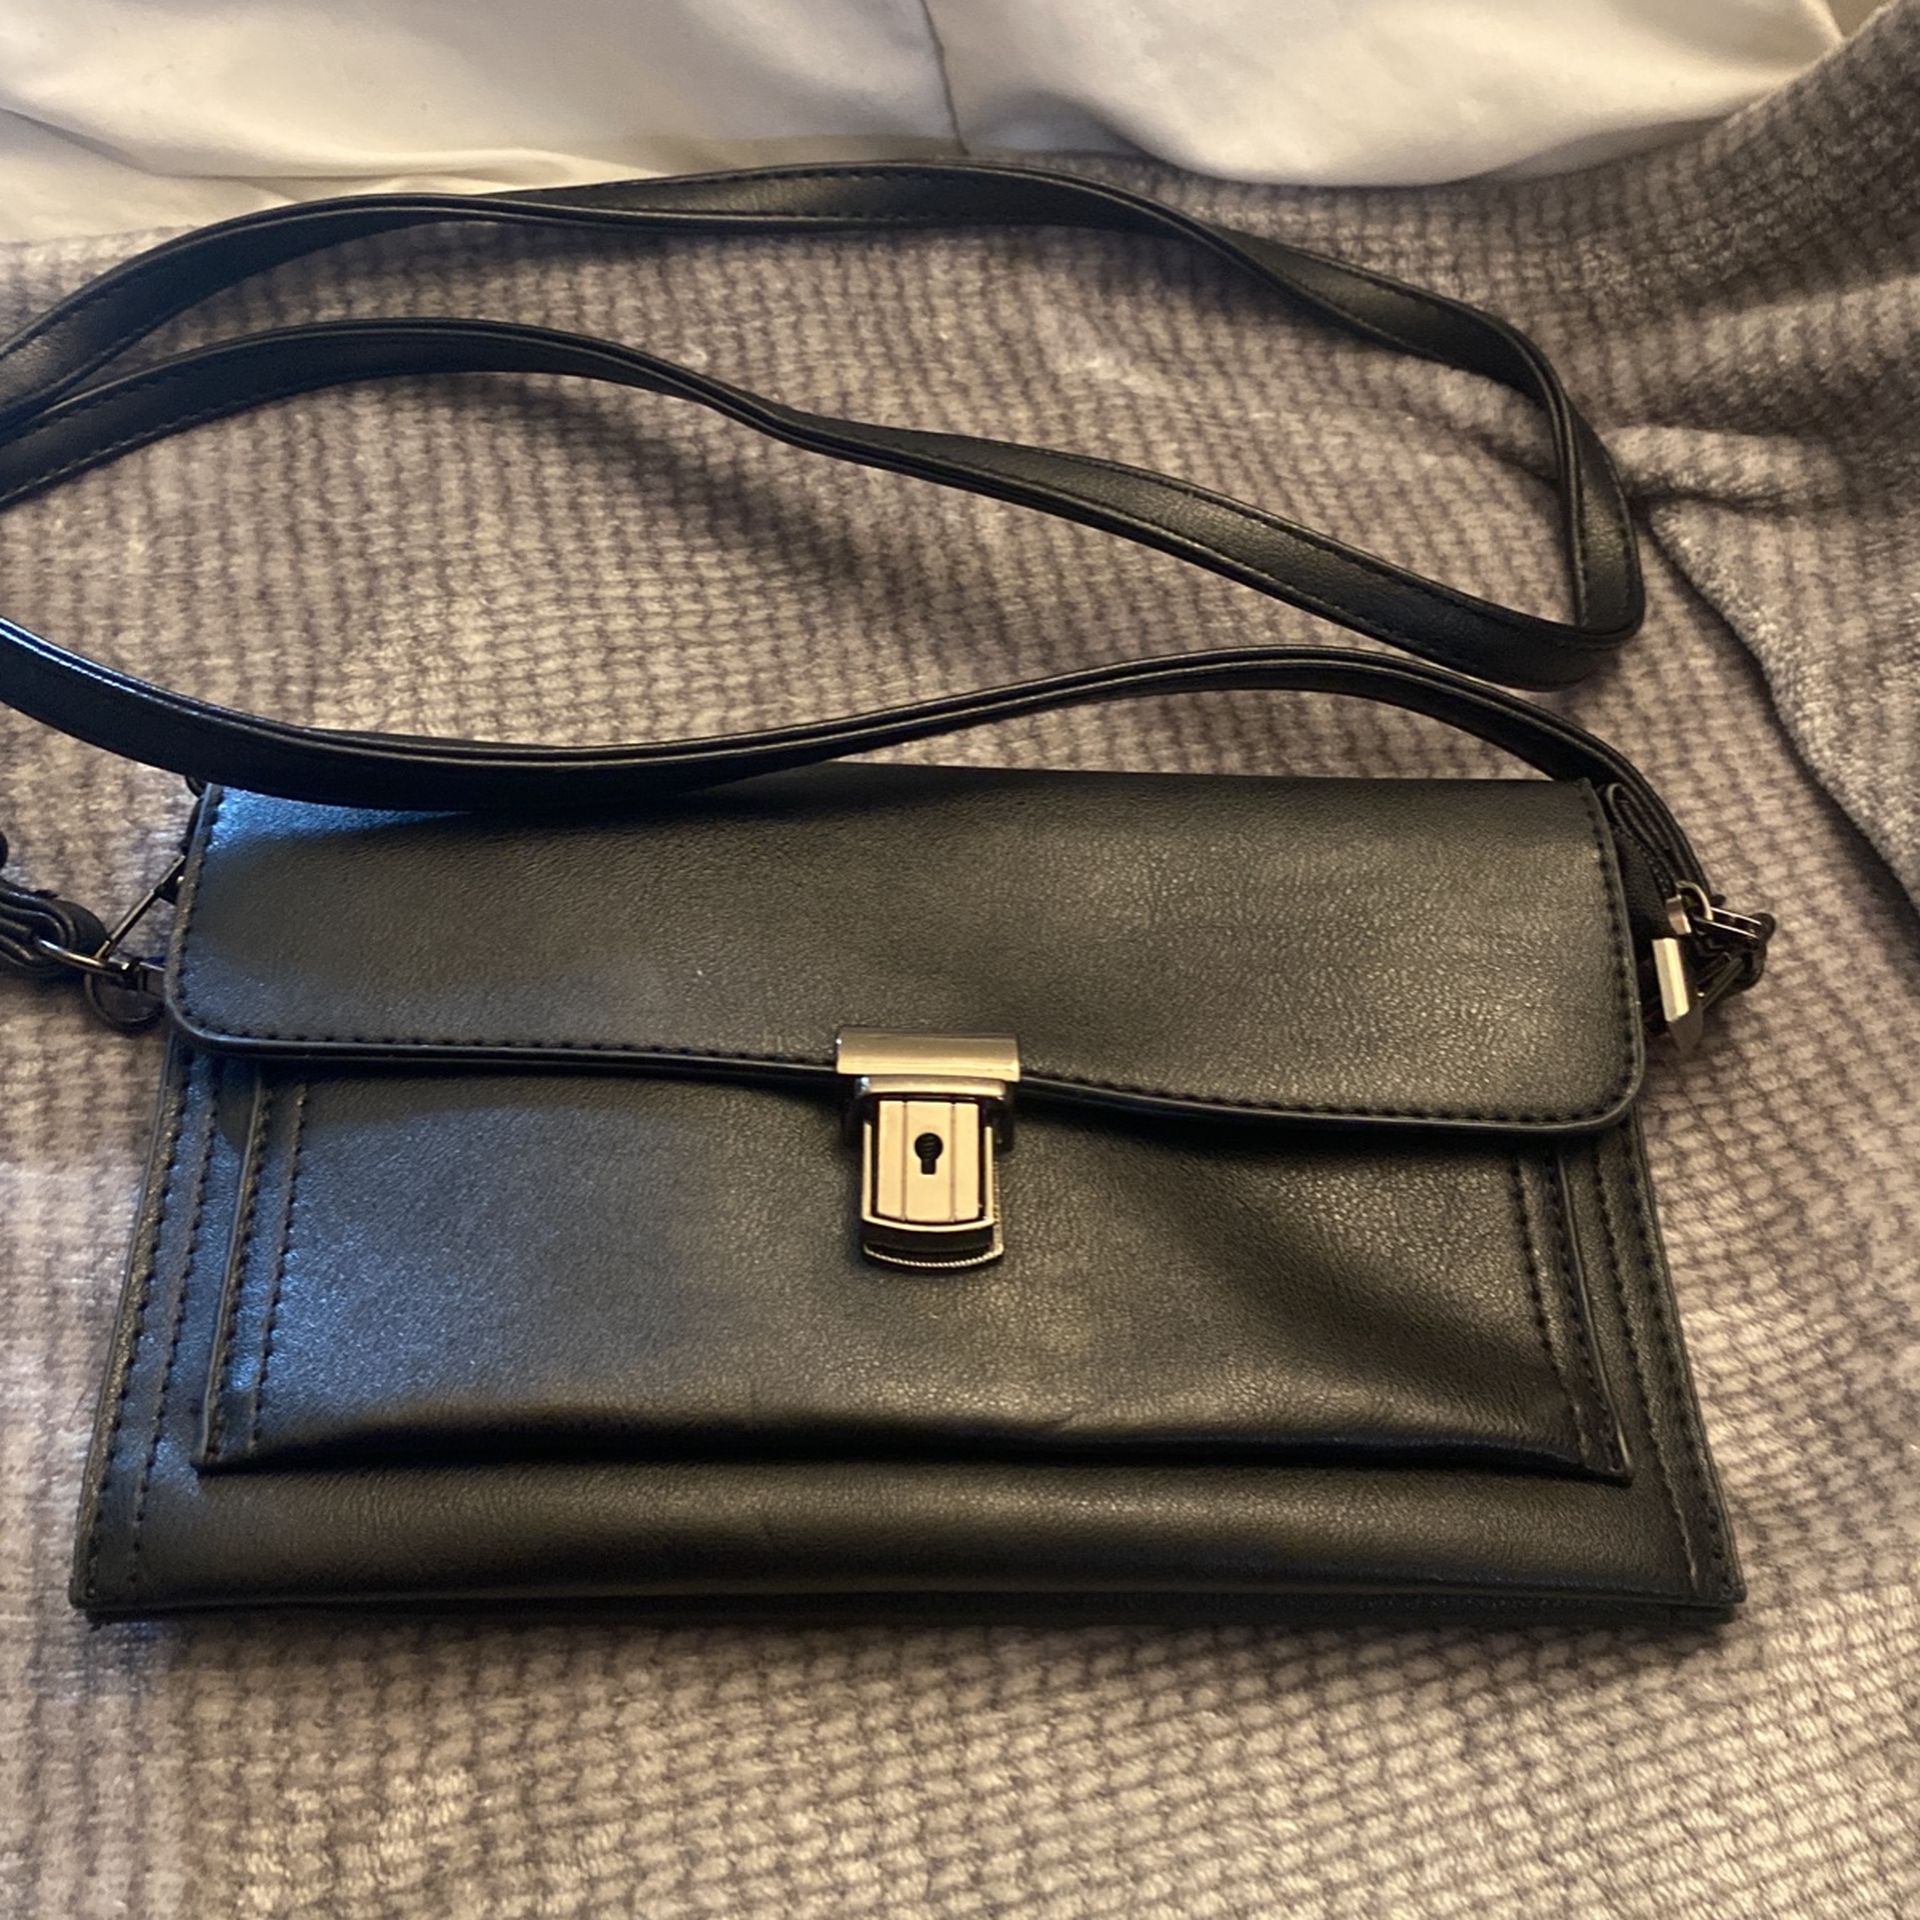 Black Bag Two In One Long Strap For Shoulder And Wrist Strap